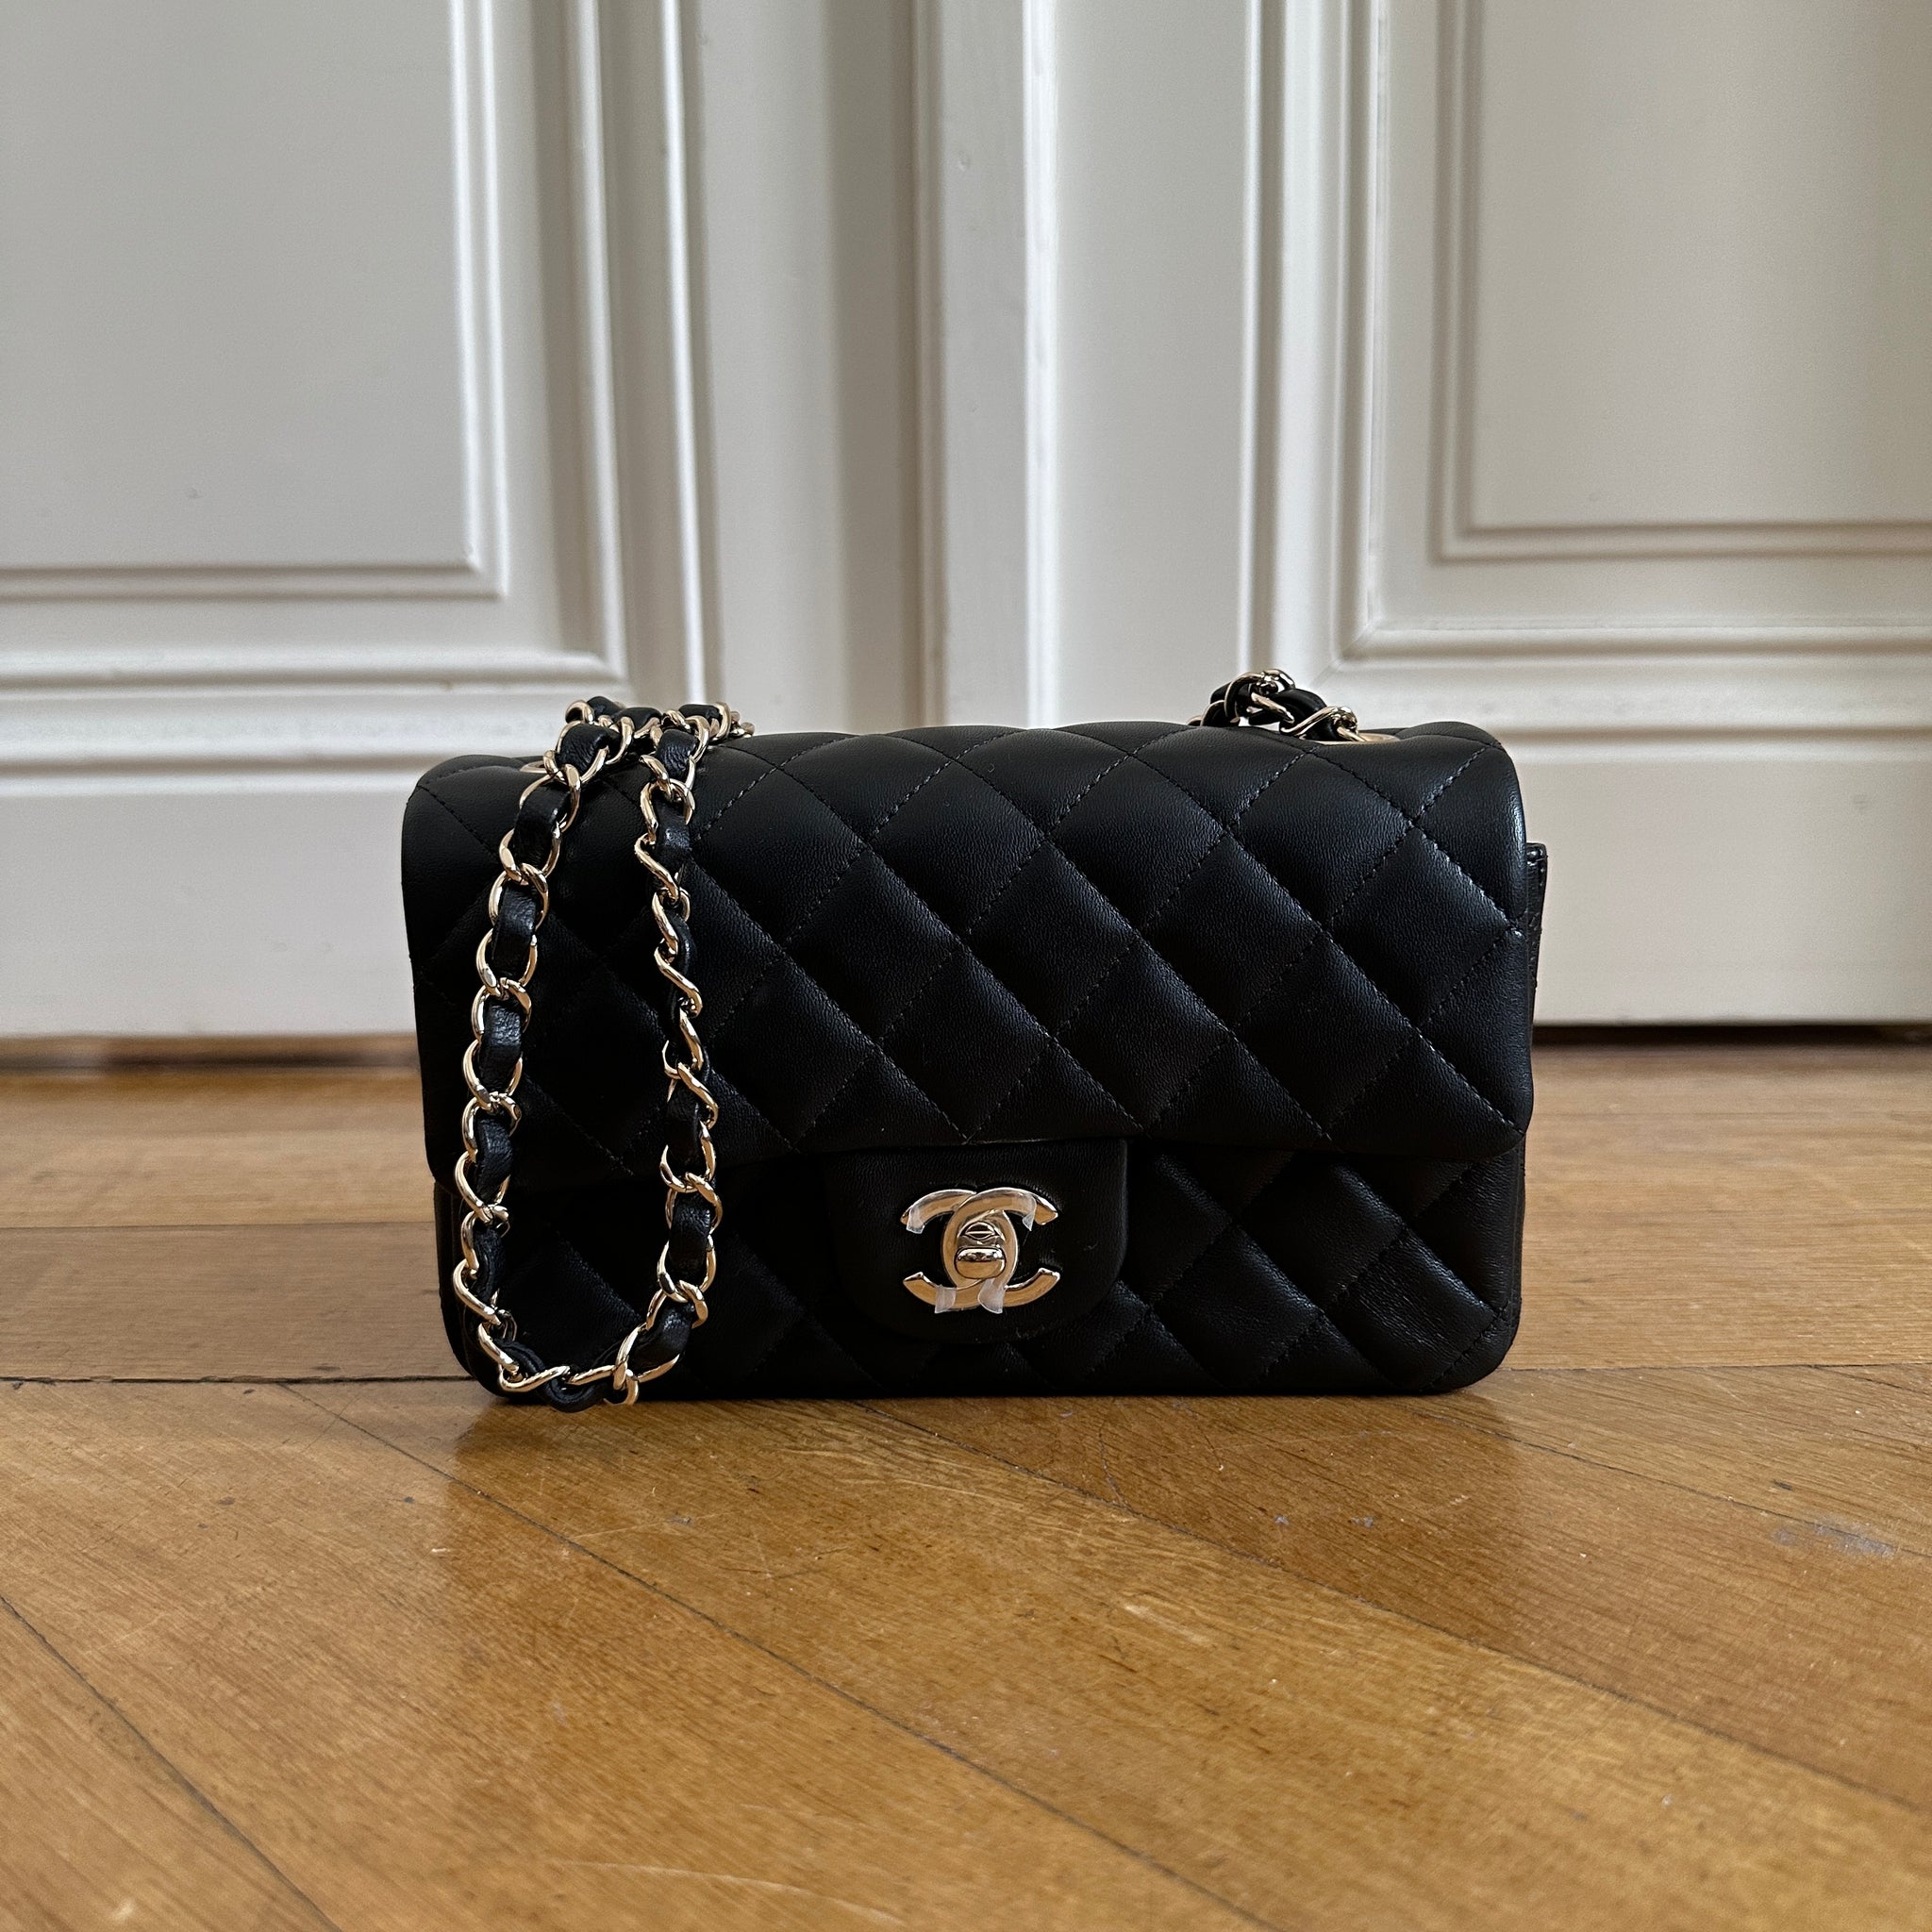 Chanel Black Quilted Calfskin Leather Single Flap Bag